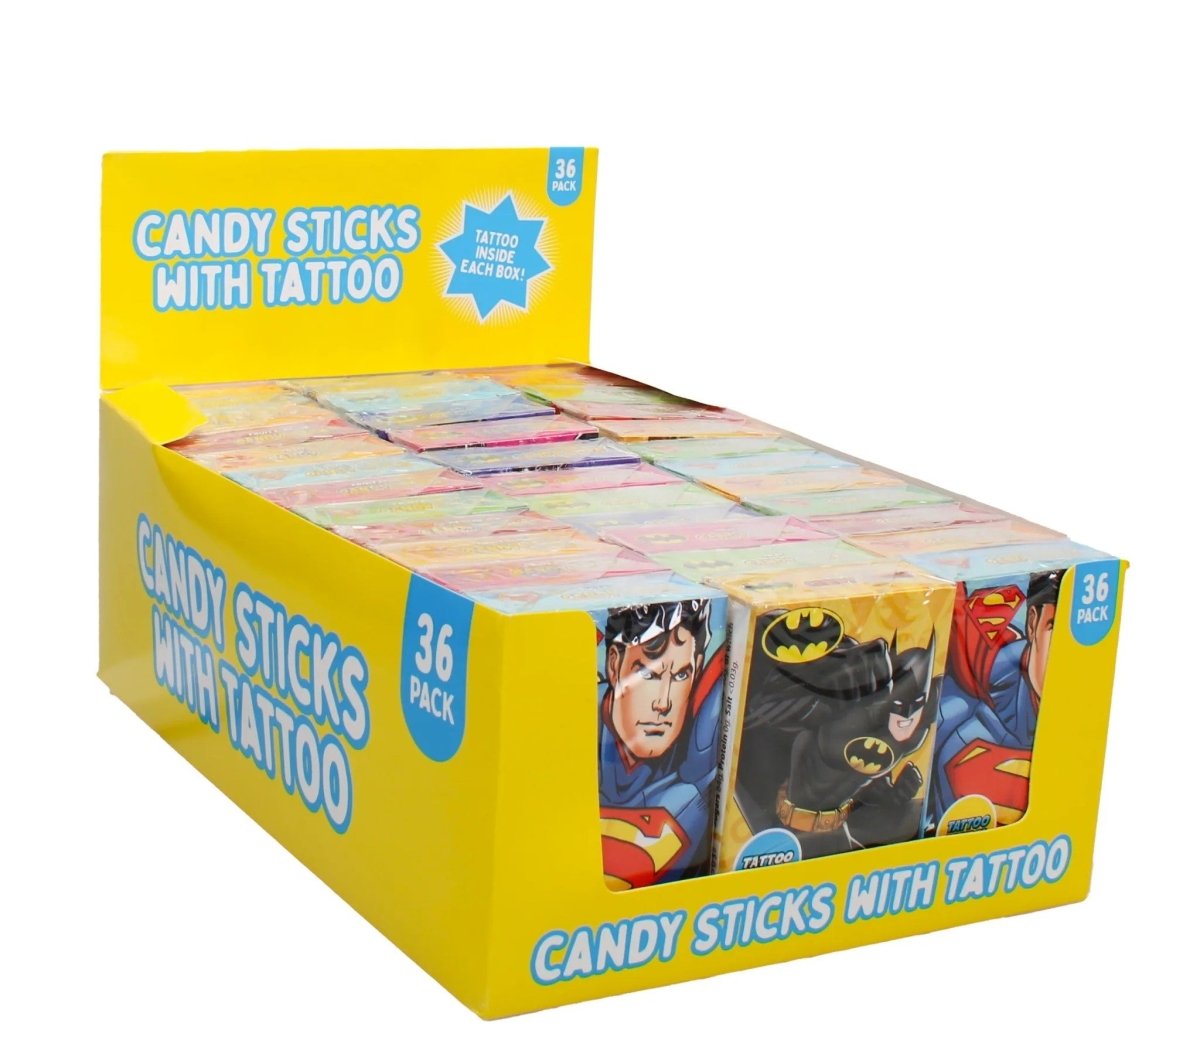 LICENCED MIX CANDY STICKS & TATTOOS 18g - Candy Mail UK